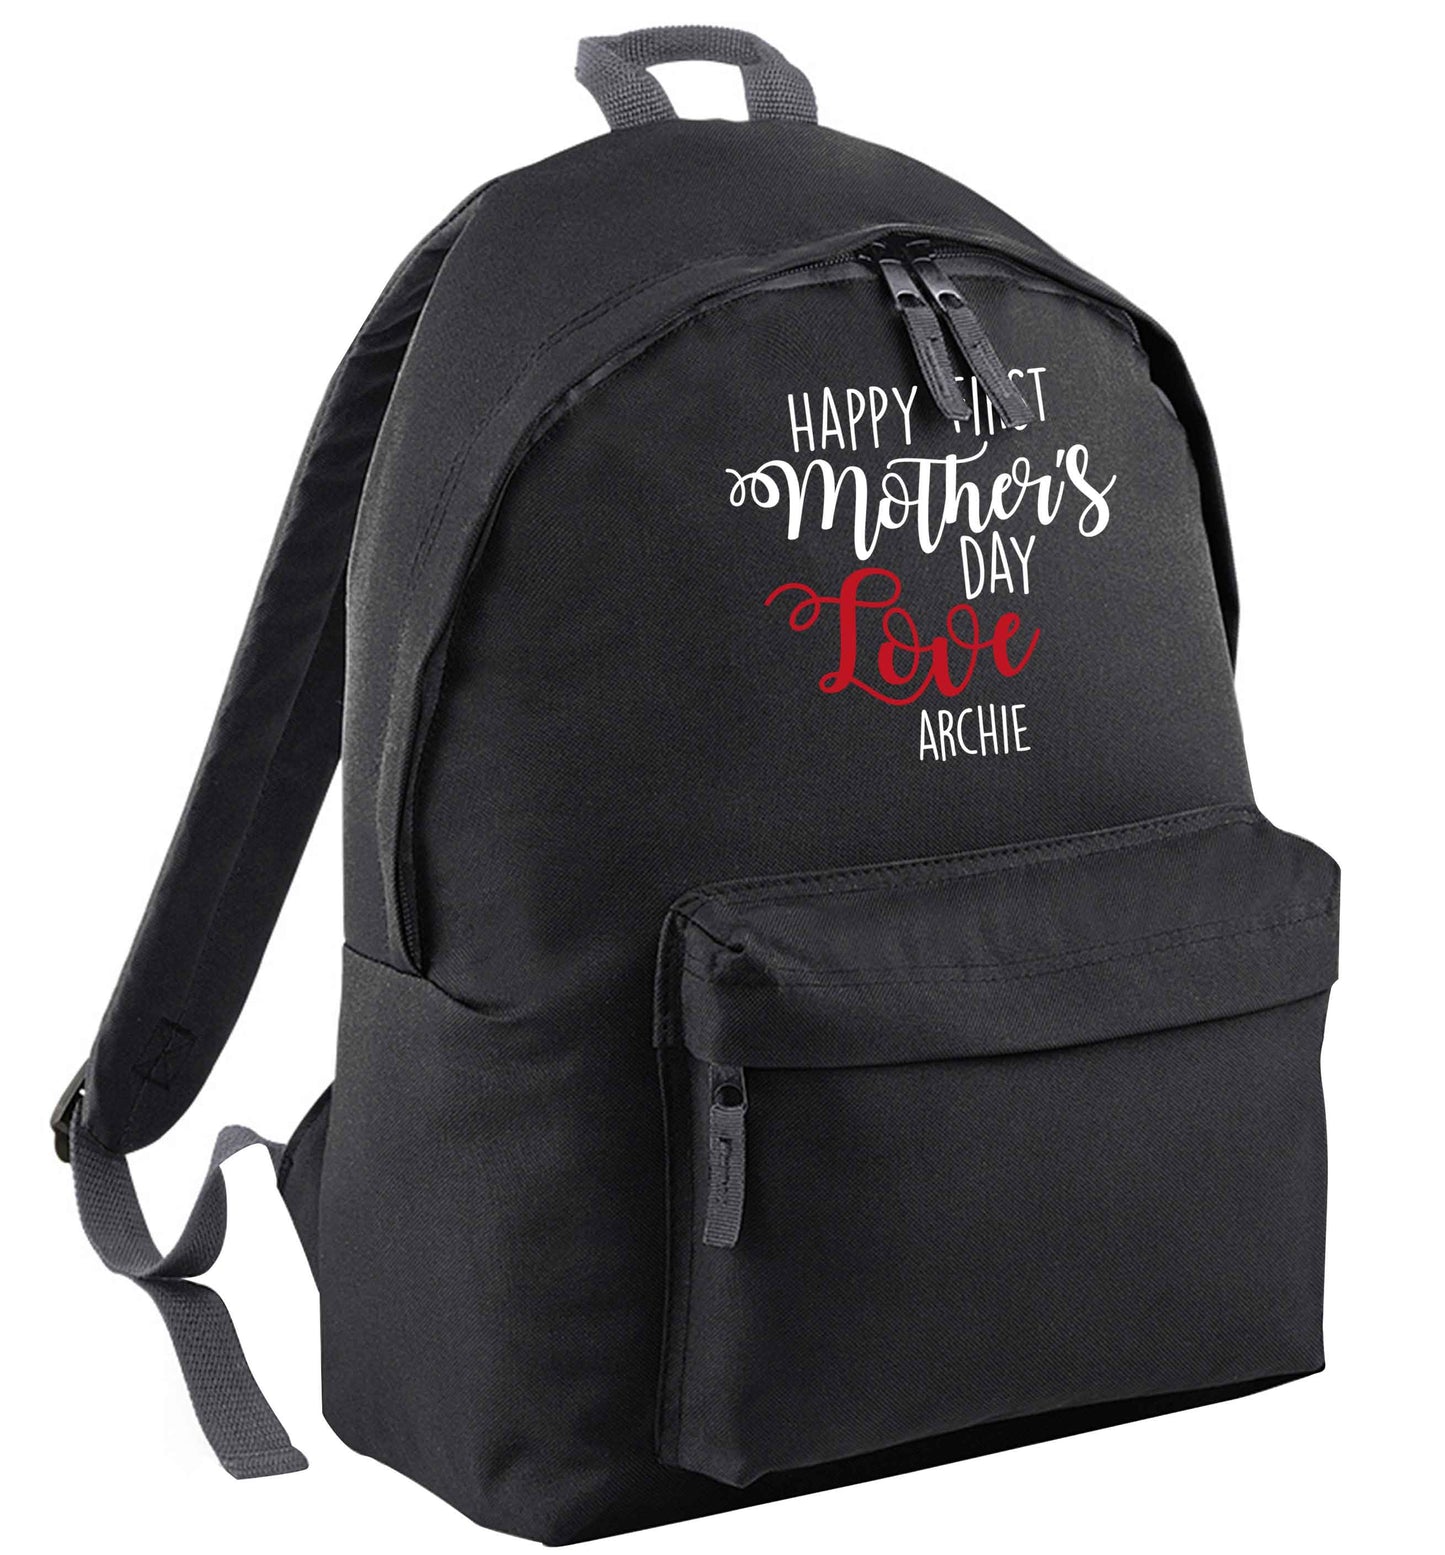 Mummy's first mother's day! | Adults backpack